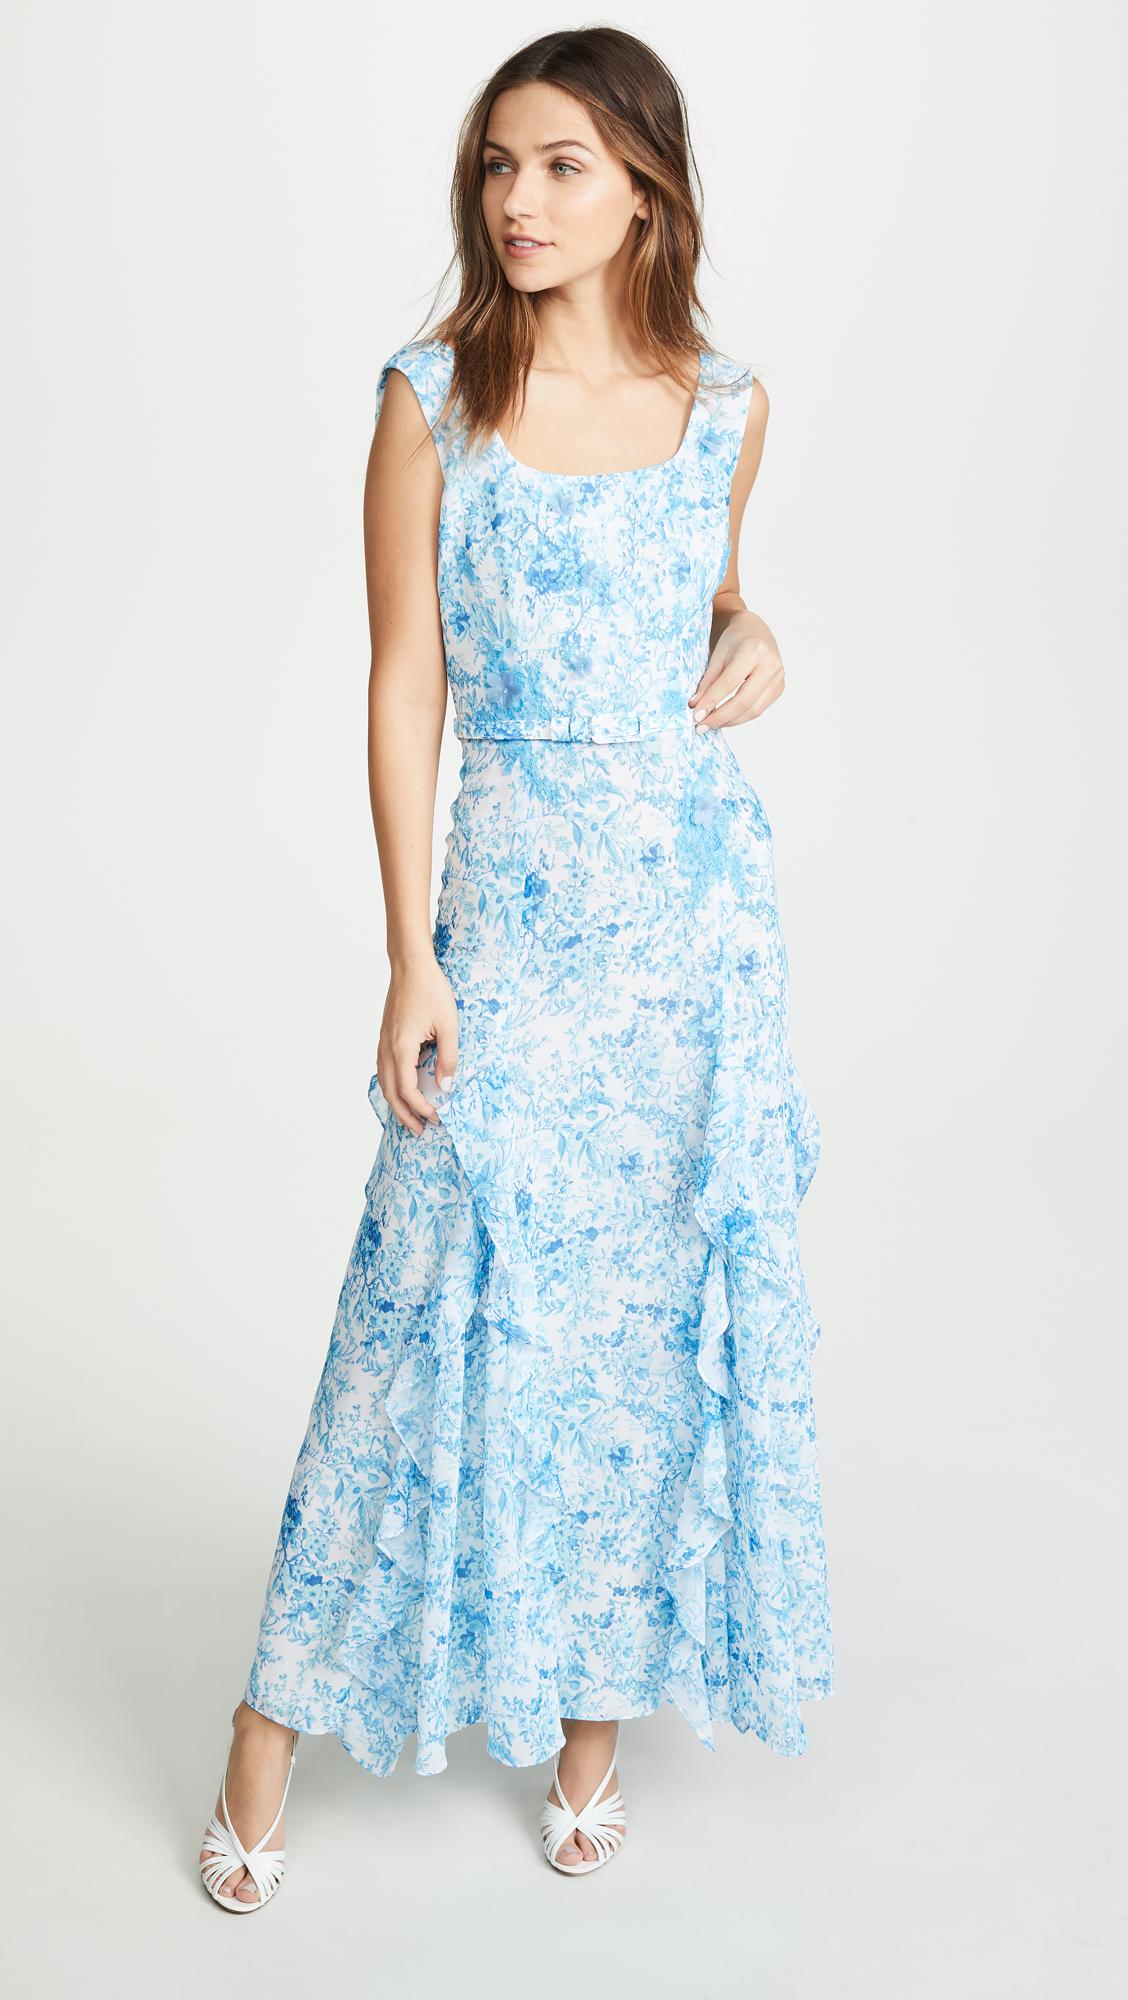 Costarellos Synthetic Floral Ruffle Dress in White/Blue